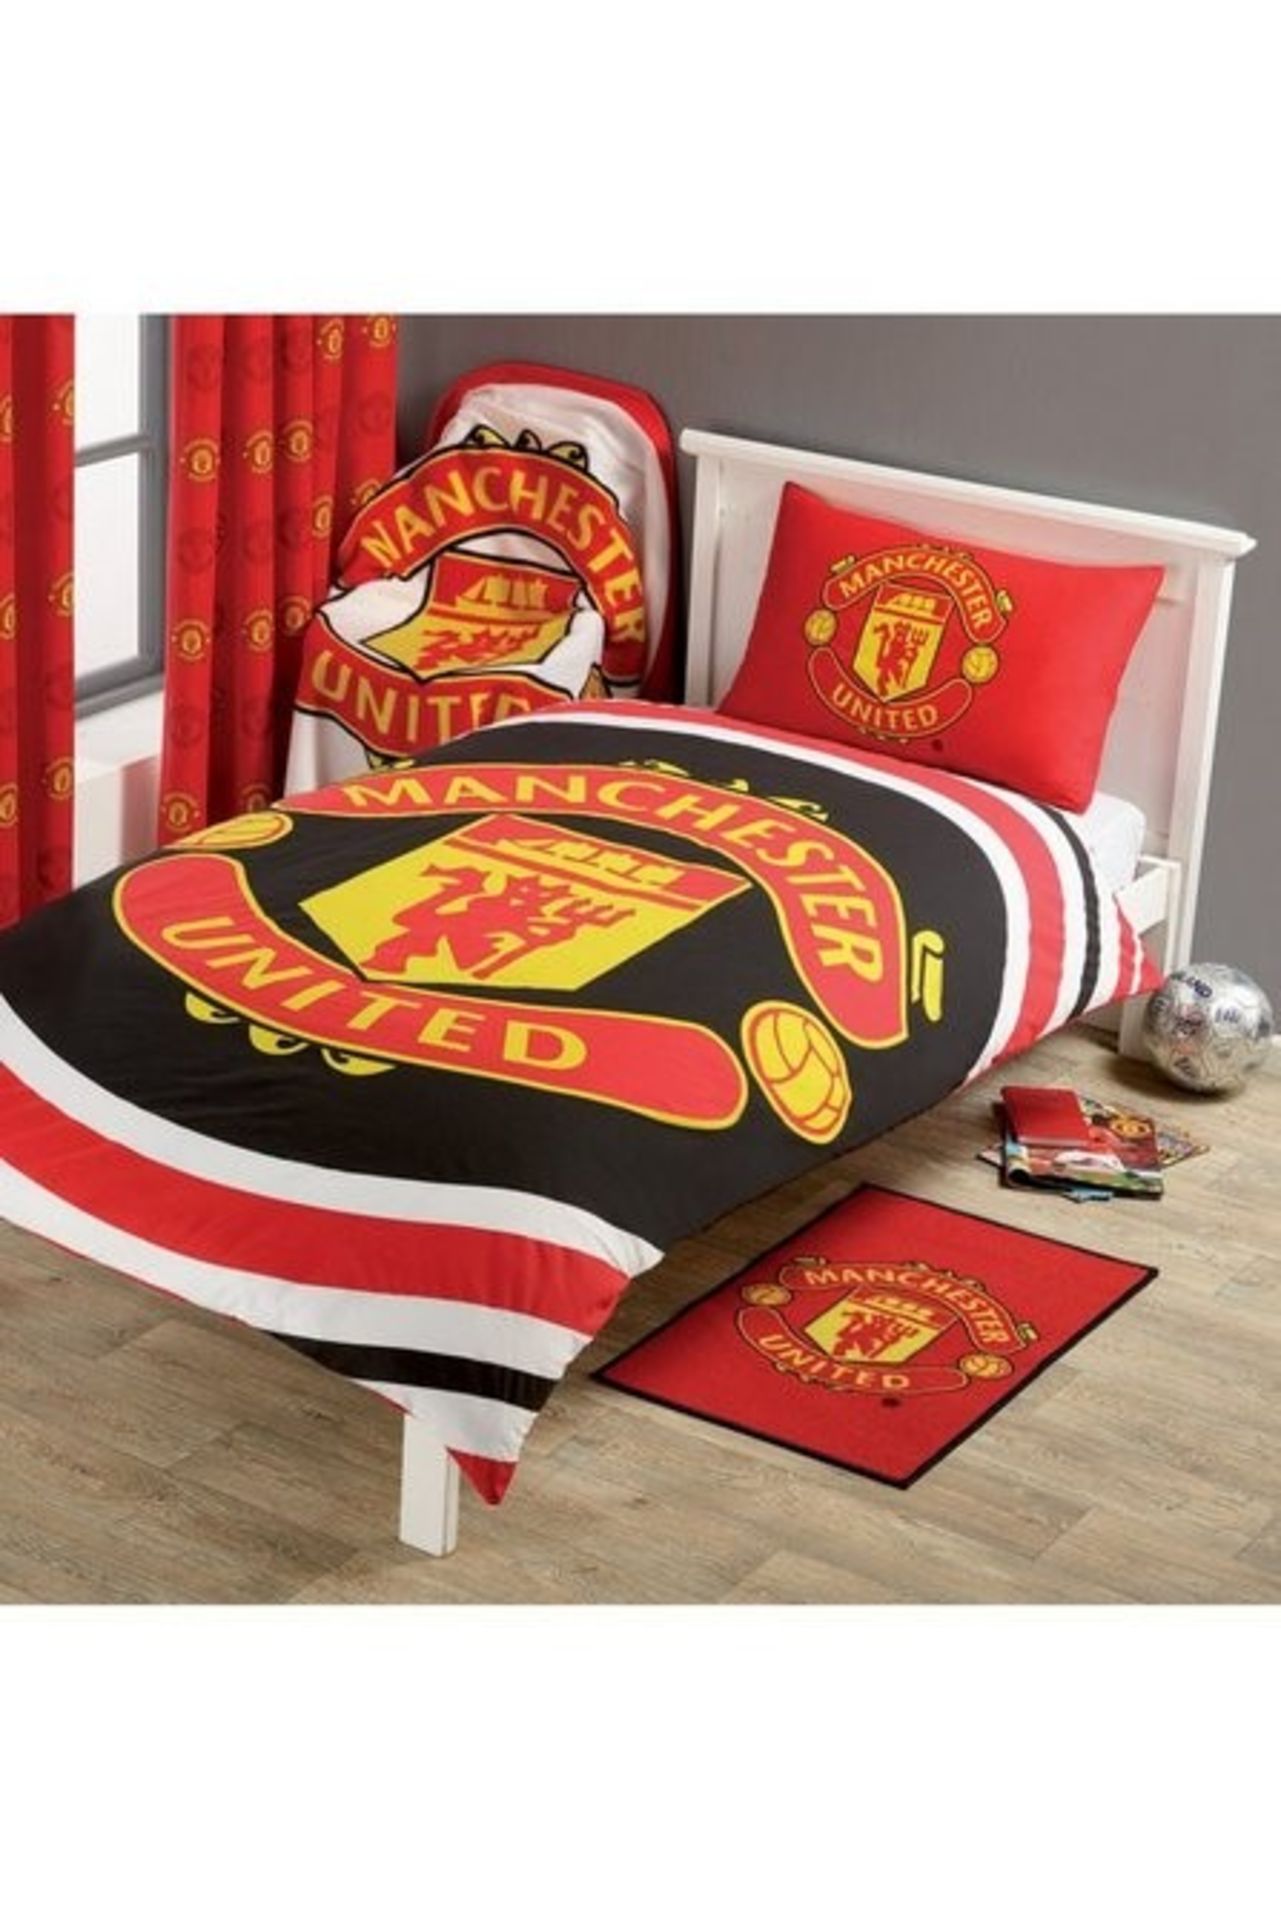 1 BAGGED MANCHESTER UNITED SINGLE DUVET SET / RRP £21.99 (PUBLIC VIEWING AVAILABLE)